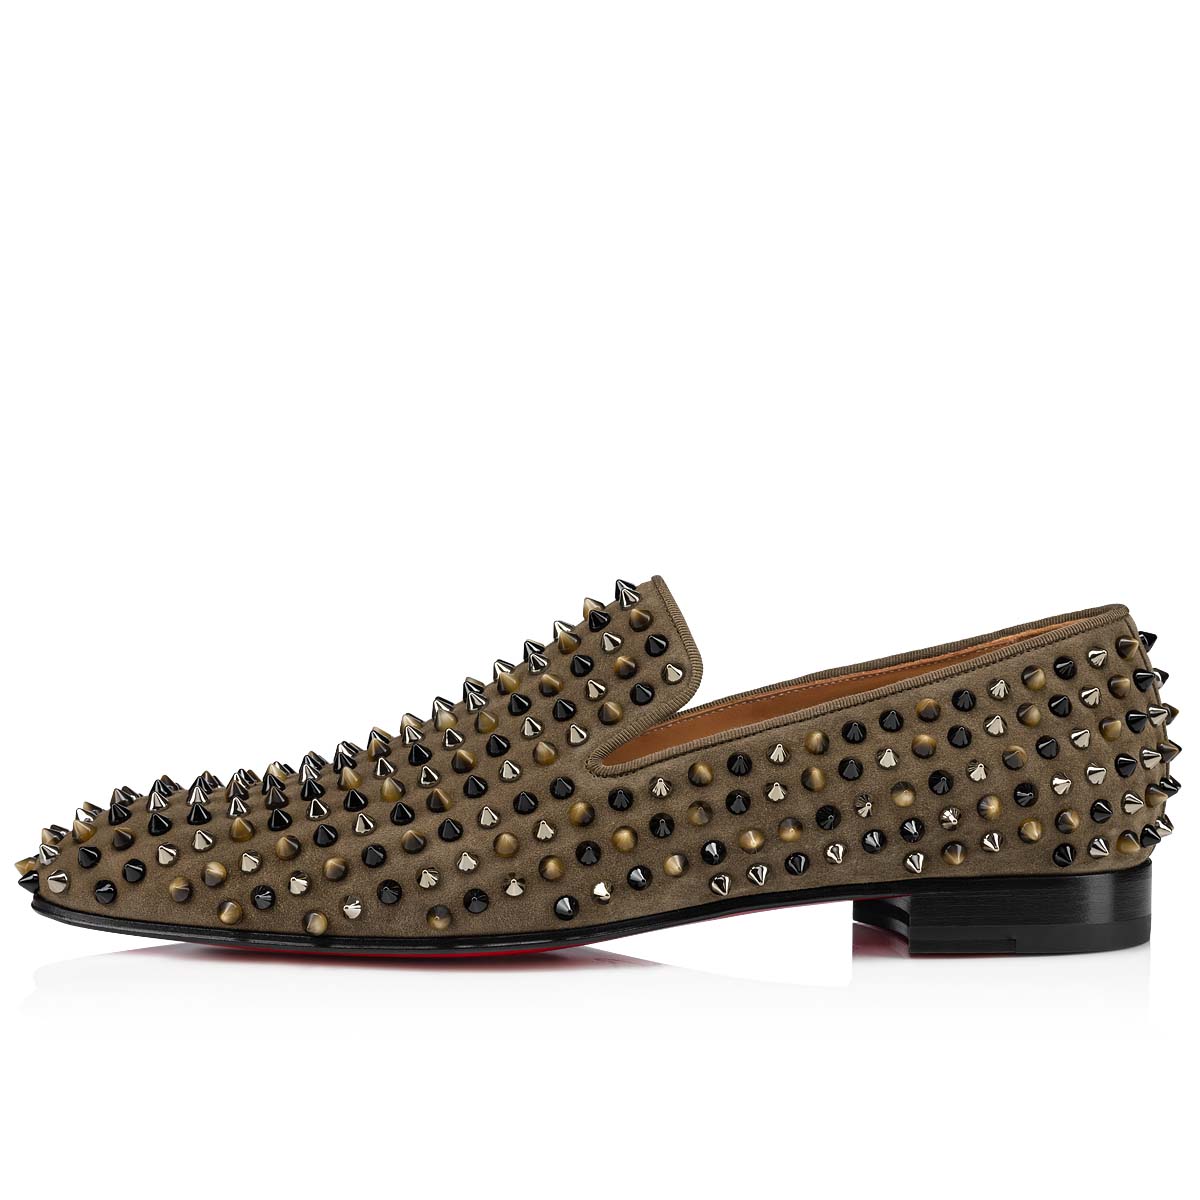 Dandelion Spikes - Loafers - Veau velours - Black - Christian Louboutin  United States